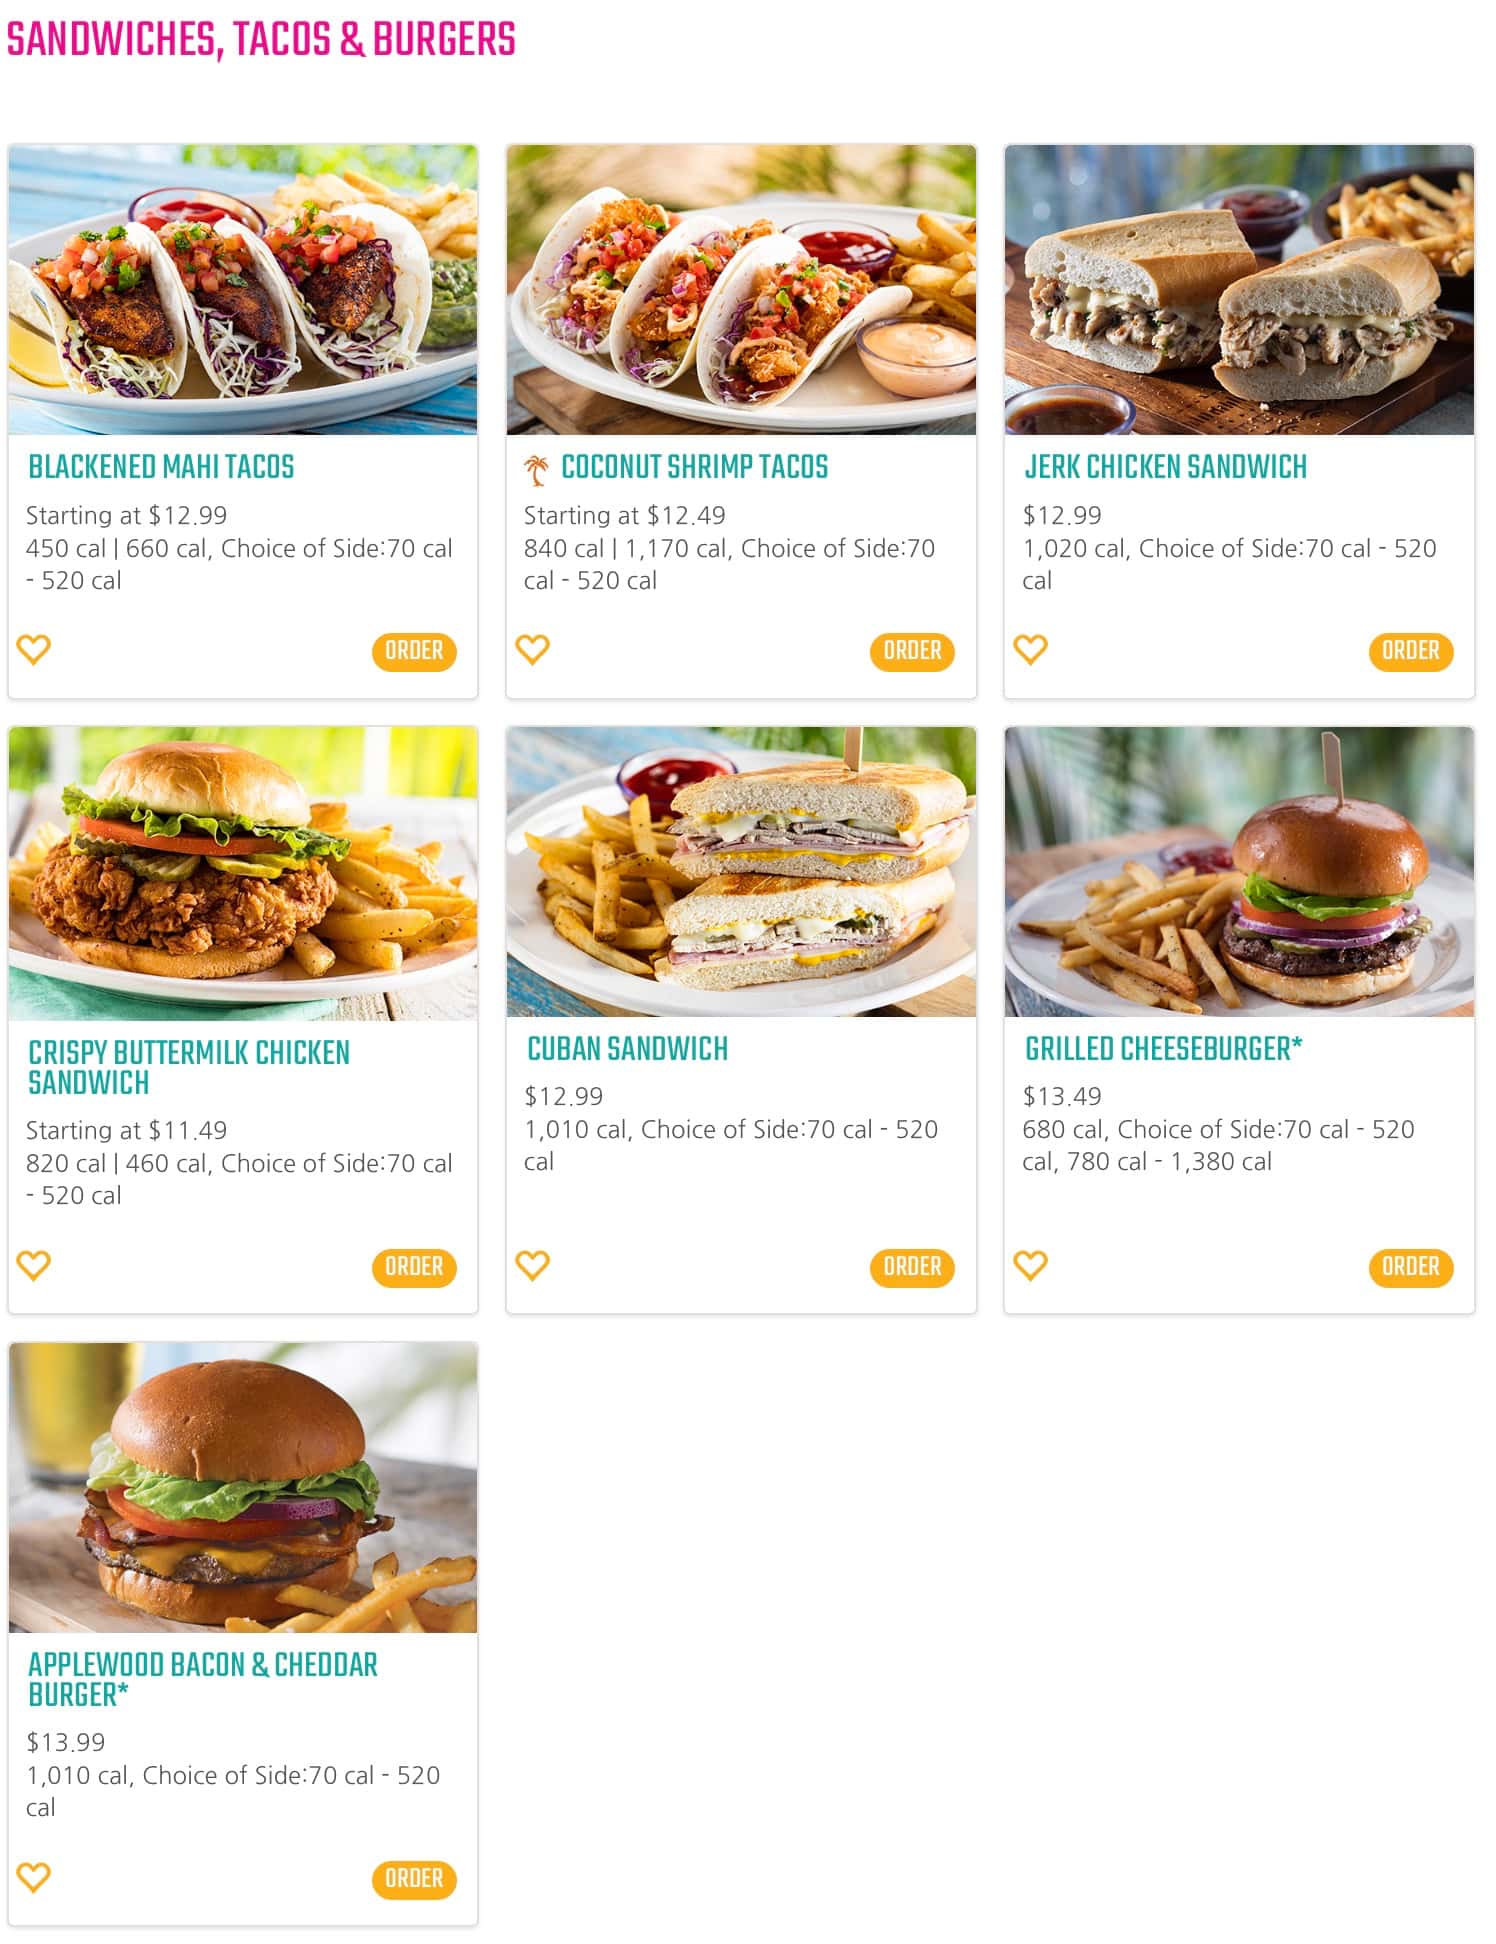 Bahama Breeze Menu with Prices Sandwiches, Tacos, and Burgers Menu